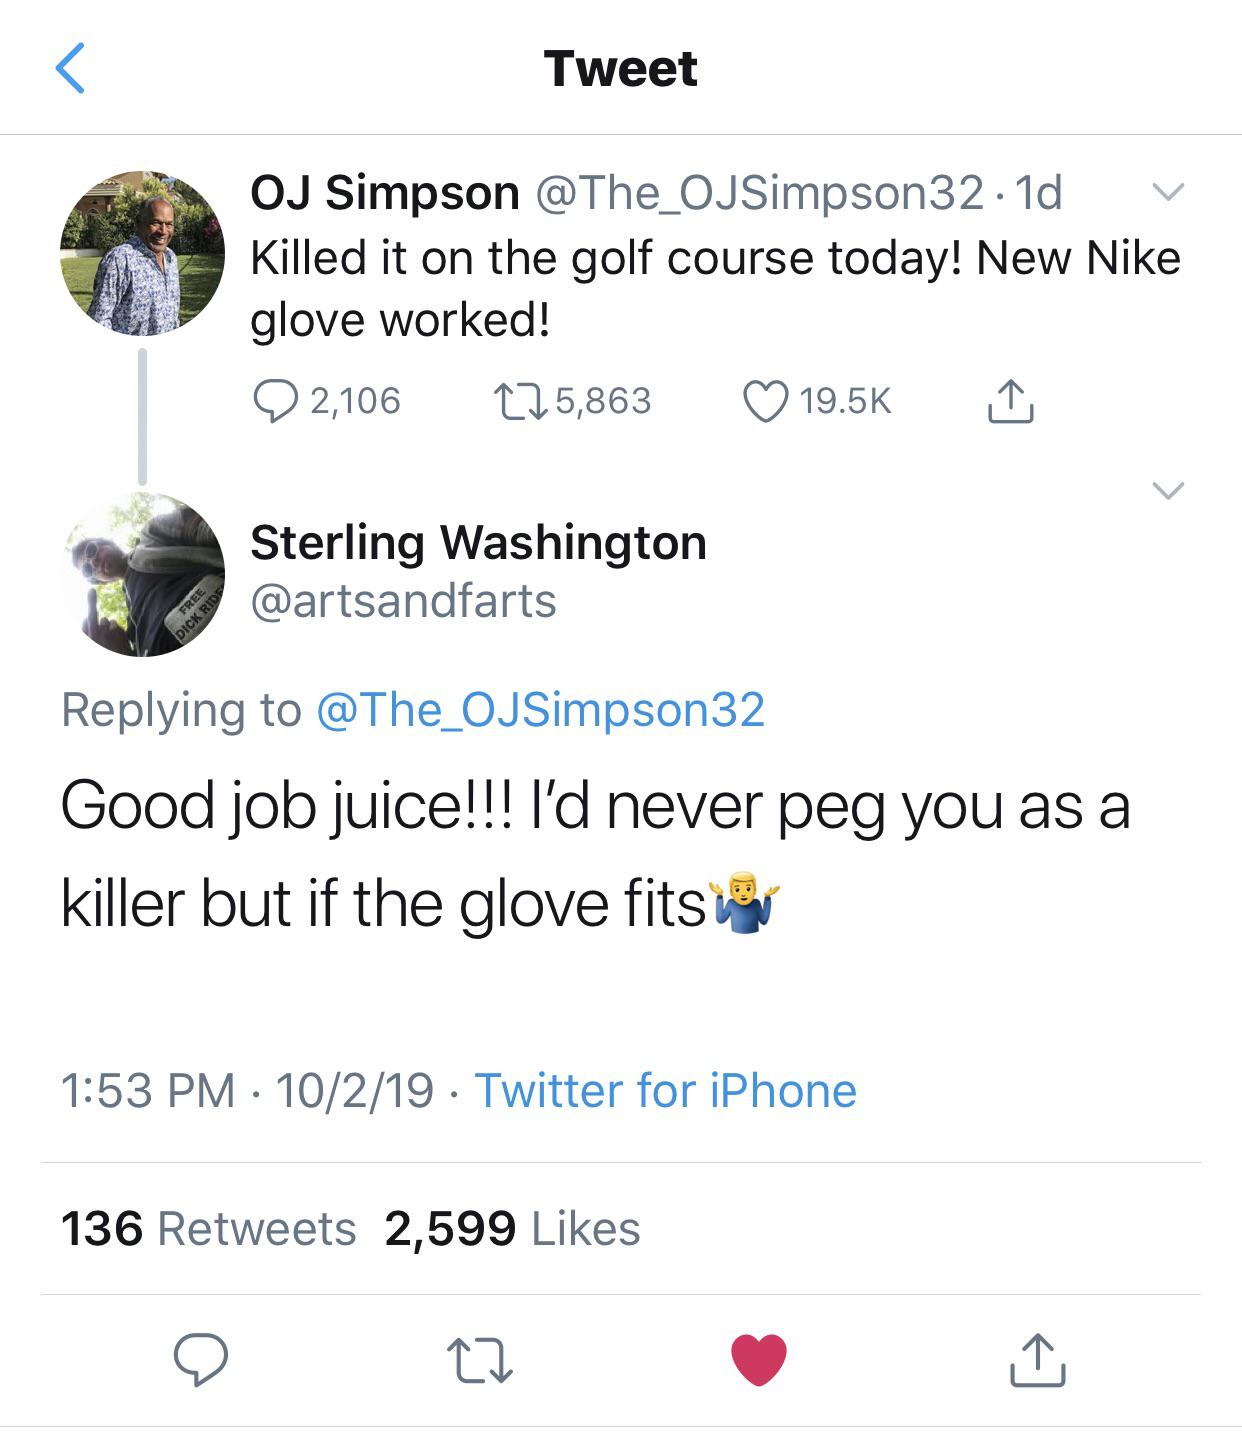 Killed it on the golf course today! New Nike glove worked! 2,106 225,863 Free Dick Ride Sterling Washington Good job juice!!! I'd never peg you as a killer but if the glove fits 10219 Twitter for iPhone 136 2,599